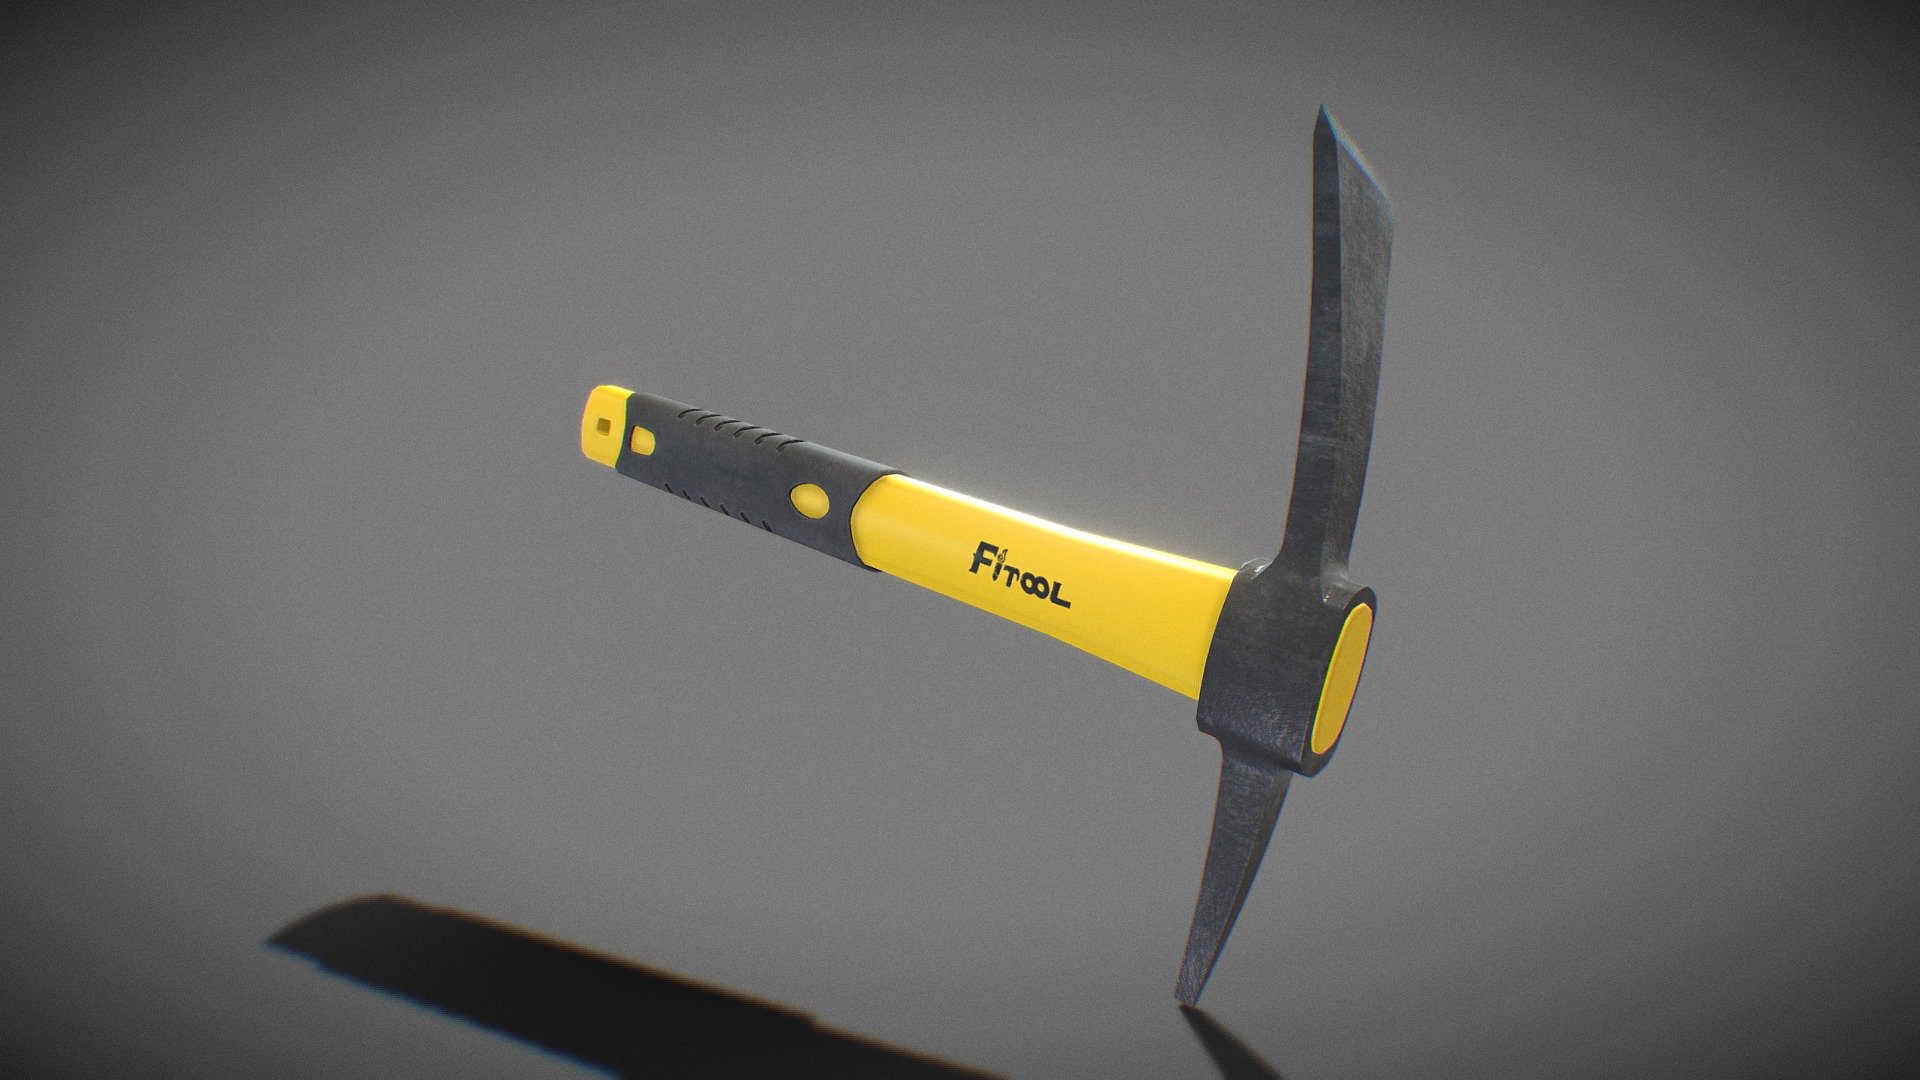 Firool gardening pickAxe painted 3d model ready for VirtualReality(VR),Augmented Reality(AR),games and other render engines.This lowpoly 3d model is baked with 4k resolution textures.The PBR_Maps includes- albedo,roughness,metallic and normal 3d model